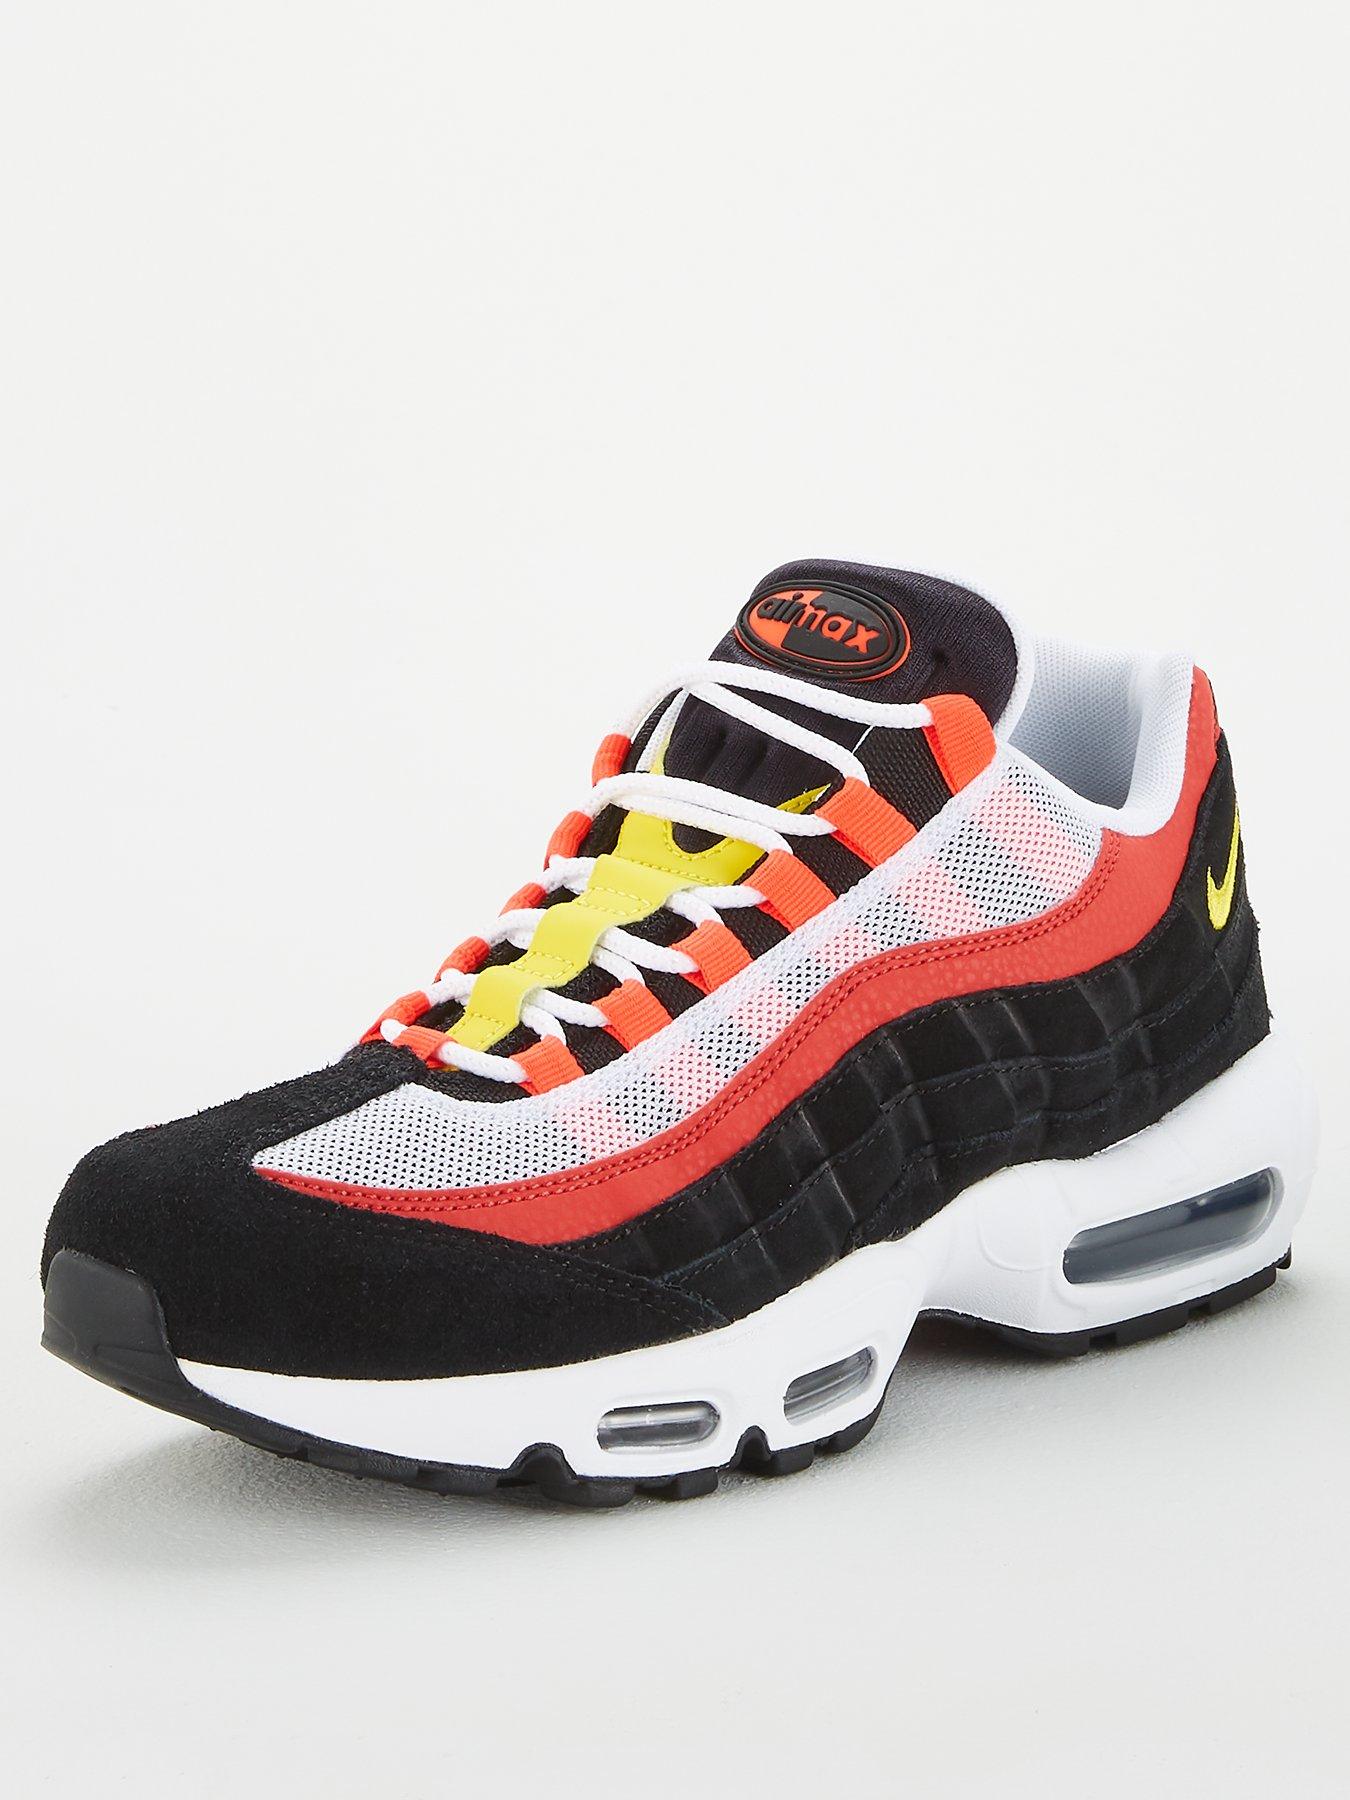 nike 95 red and black